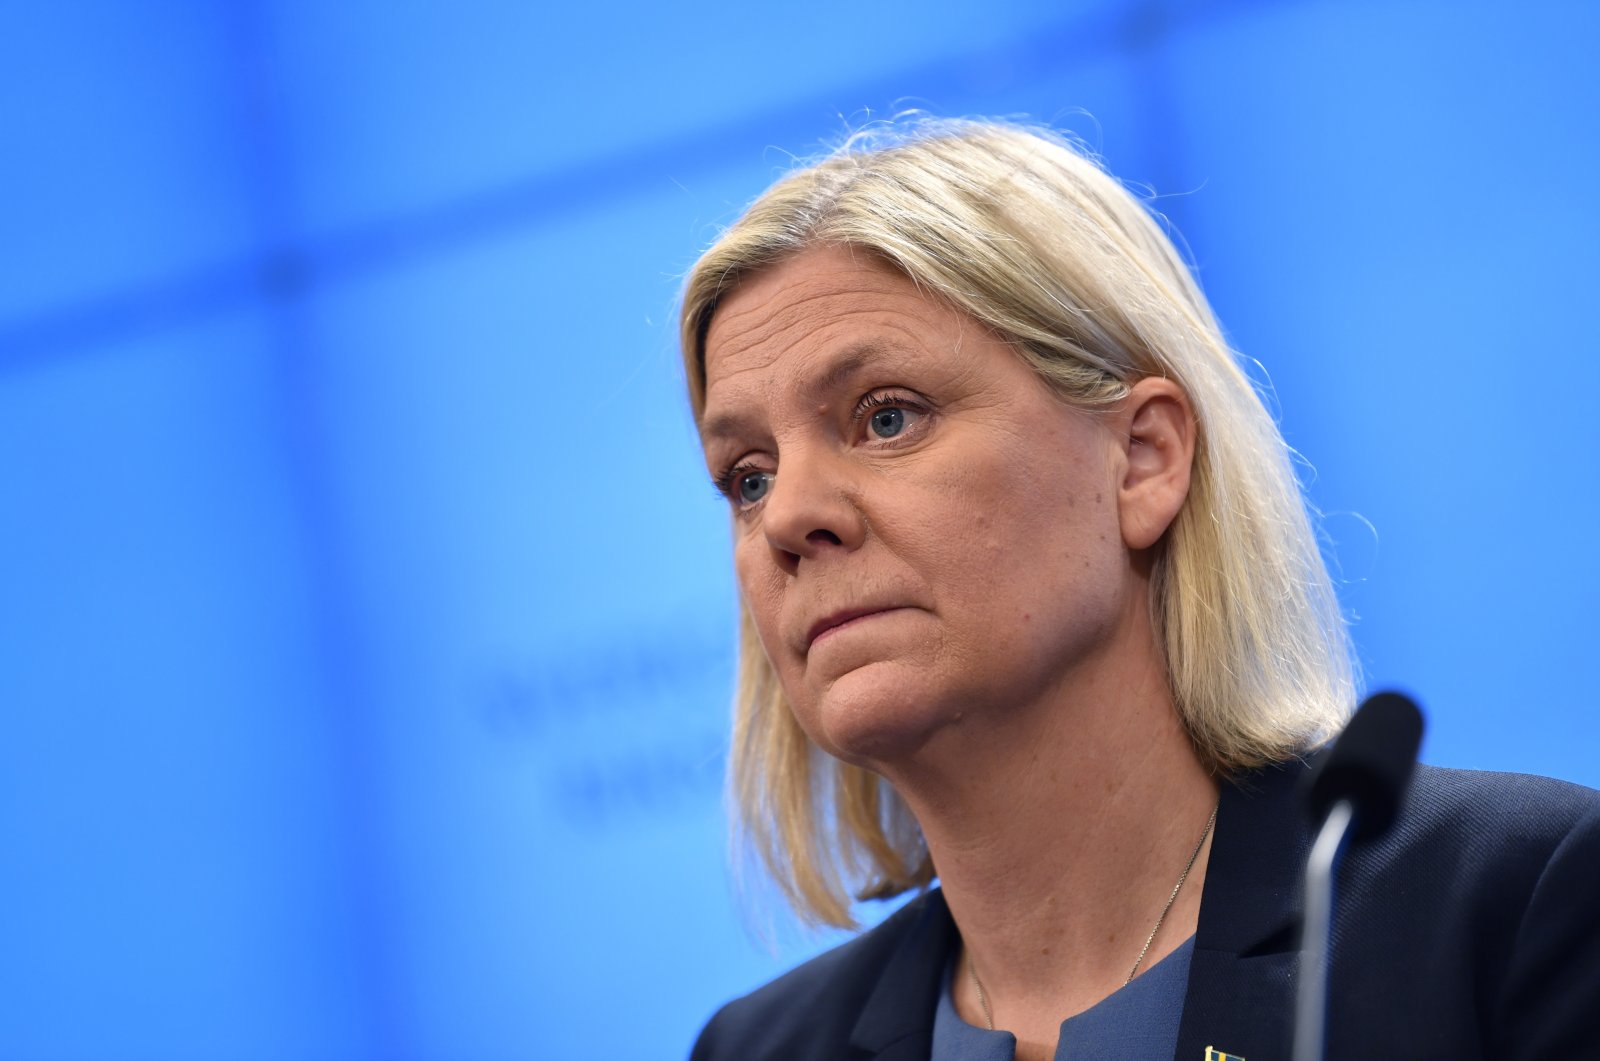 Swedish Social Democratic Party leader and newly appointed Prime Minister Magdalena Andersson during a press conference after the budget vote in the Swedish parliament, Stockholm, Nov. 24 2021. (EPA Photo)